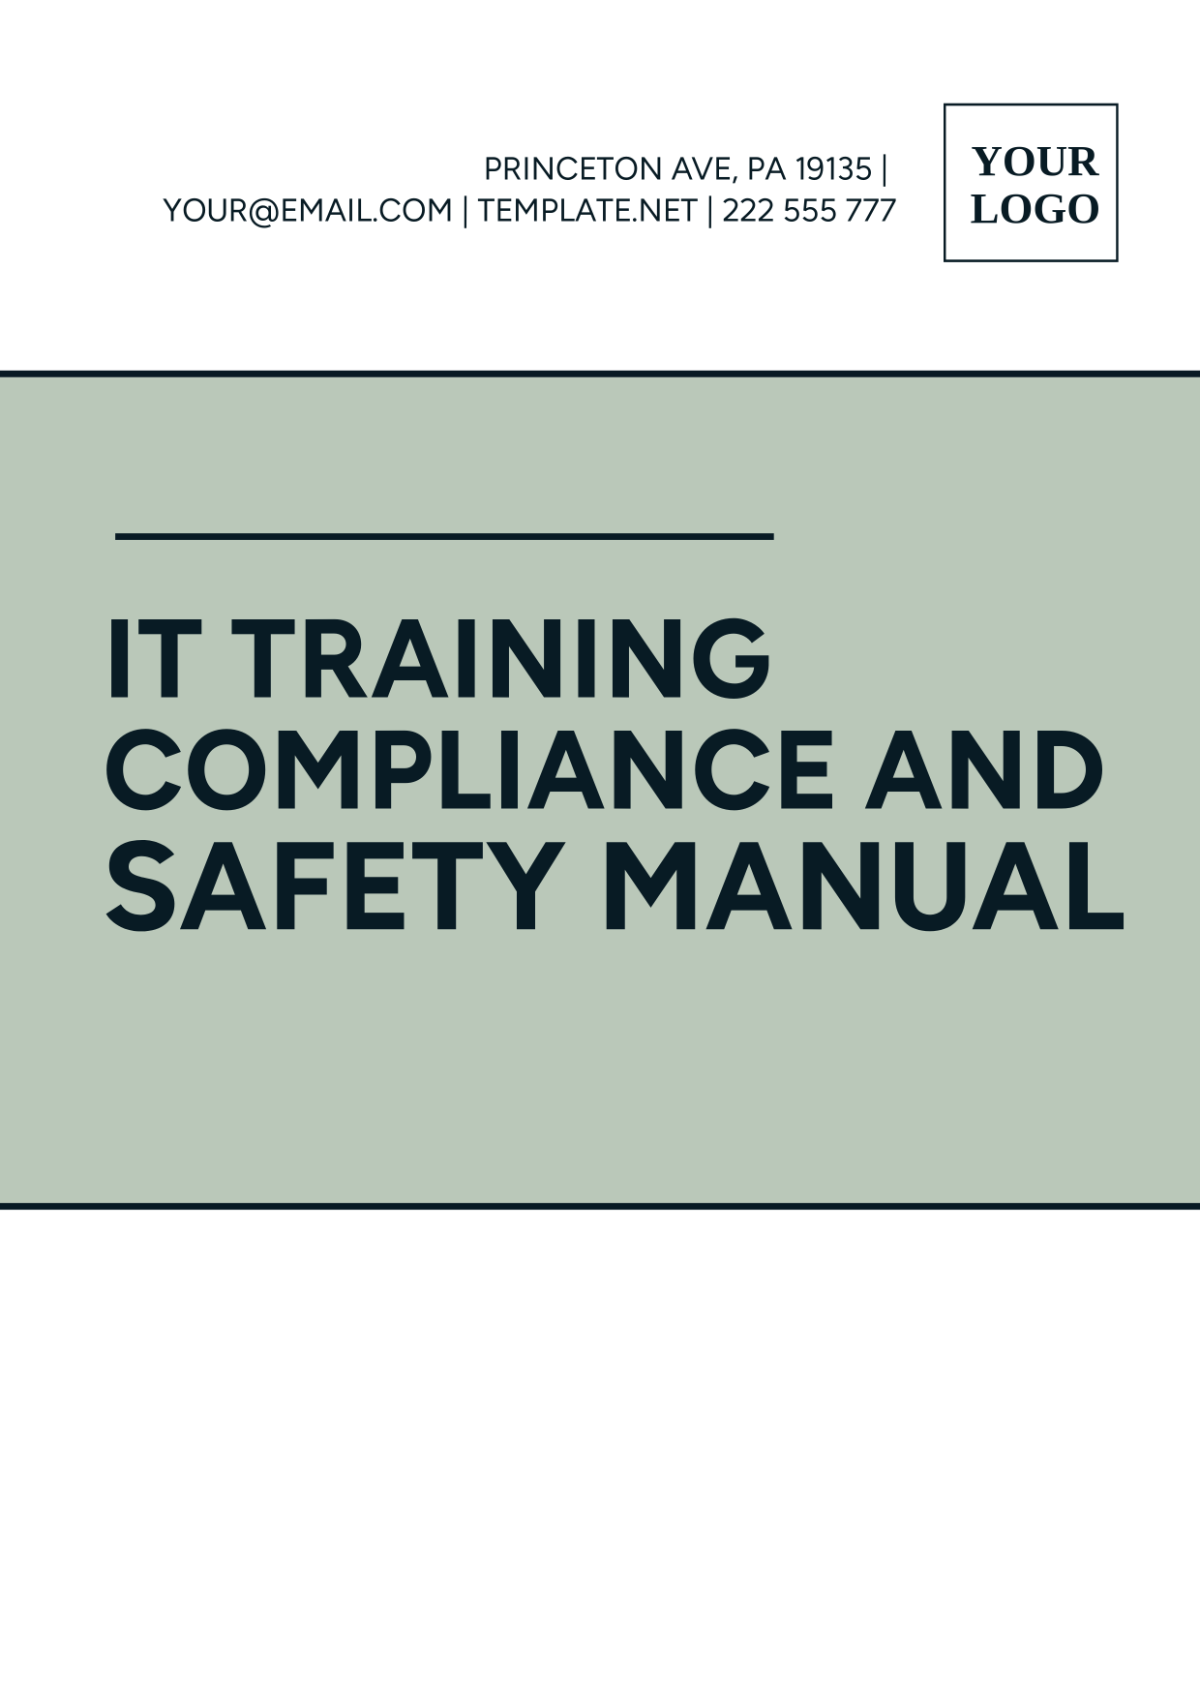 IT Training Compliance And Safety Manual Template